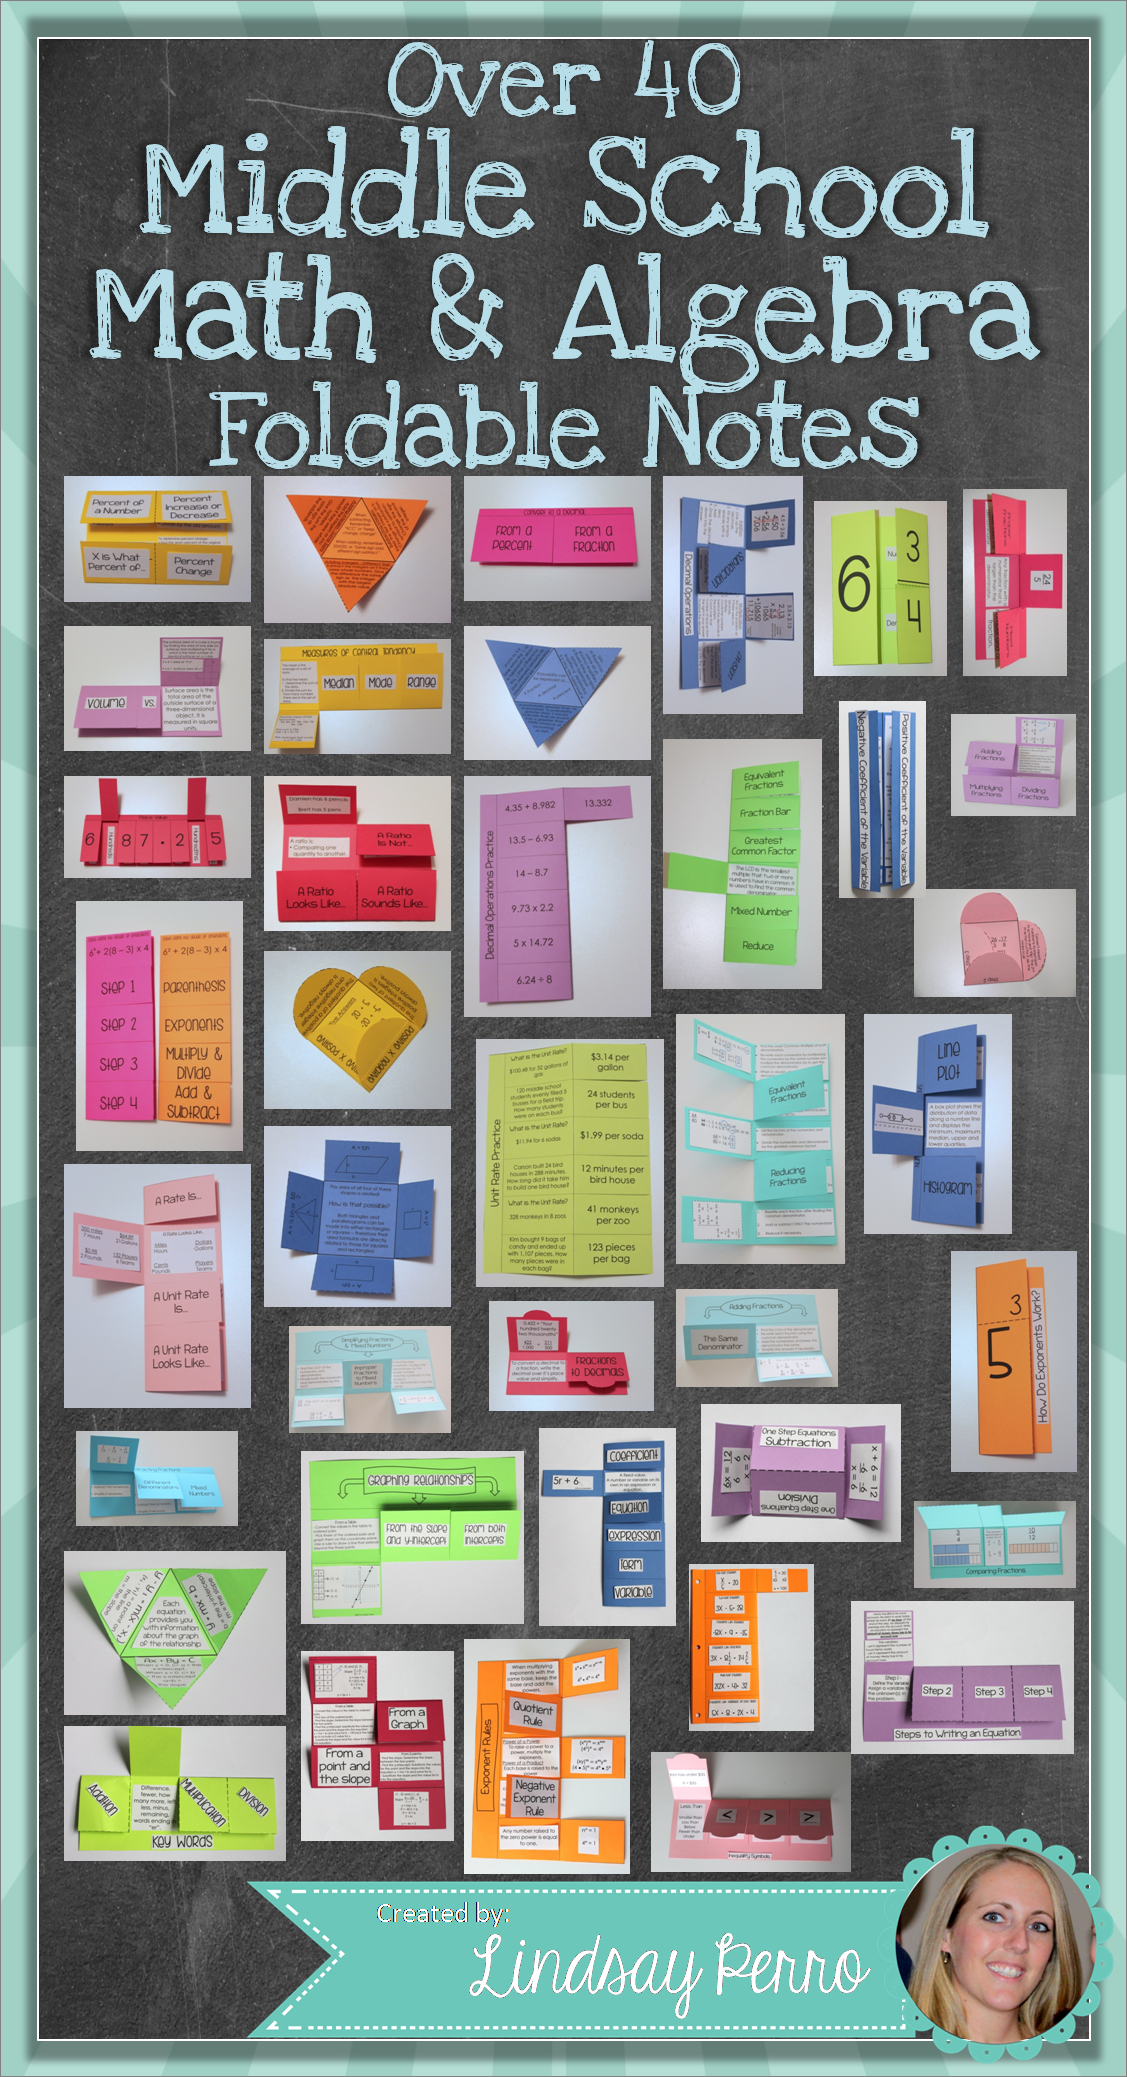 This HUGE collection of 40 foldables will breathe some life back into notes on many Middle School Math concepts.  Each foldable